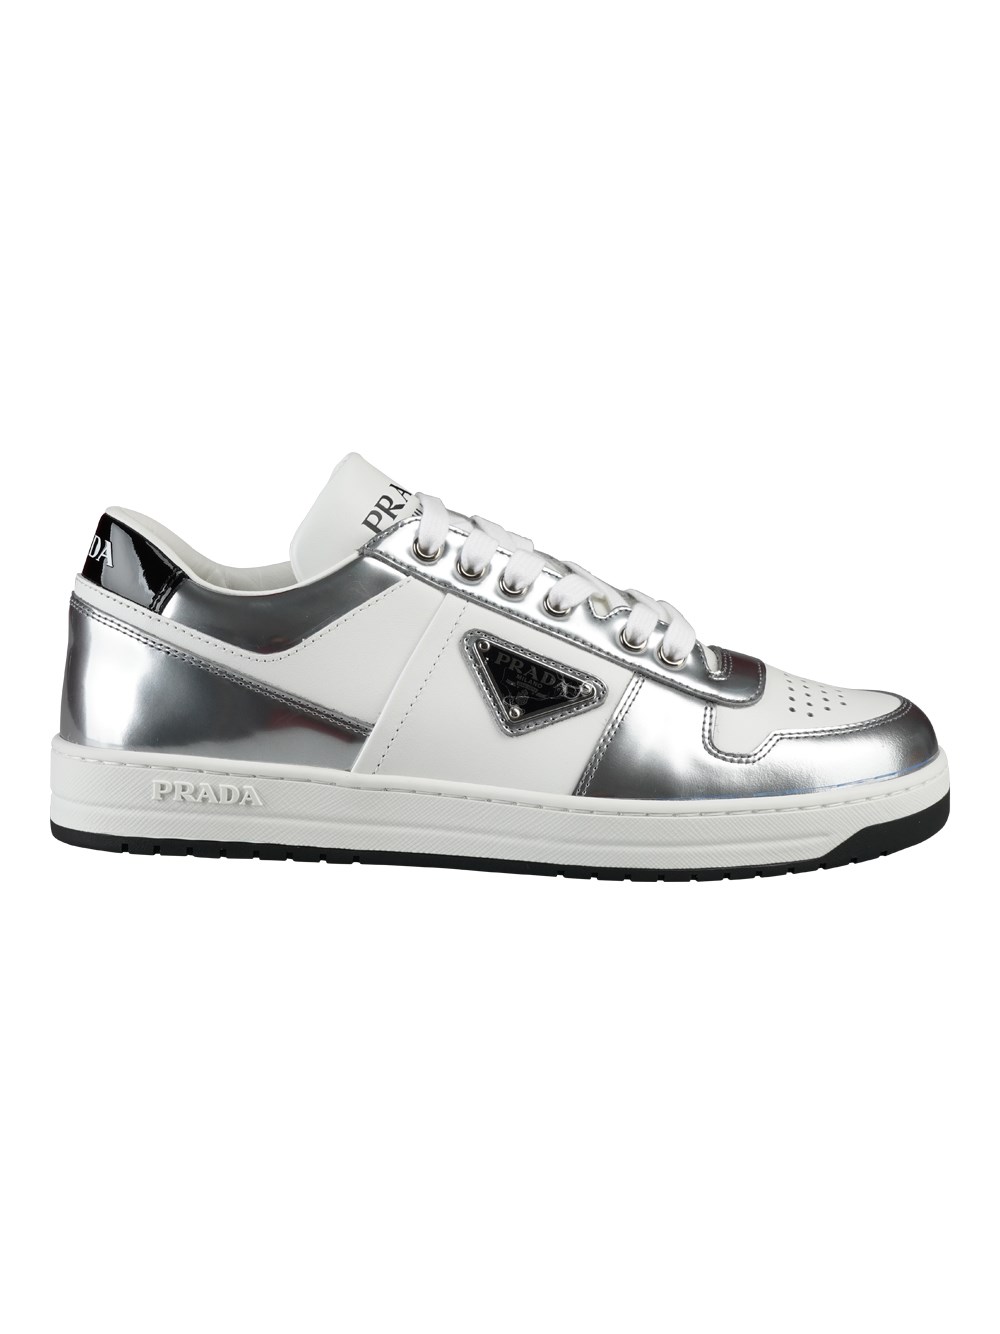 prada 2EE364/3LL2 F0J36 BIANCO/ARGENTO available on montiboutique.com